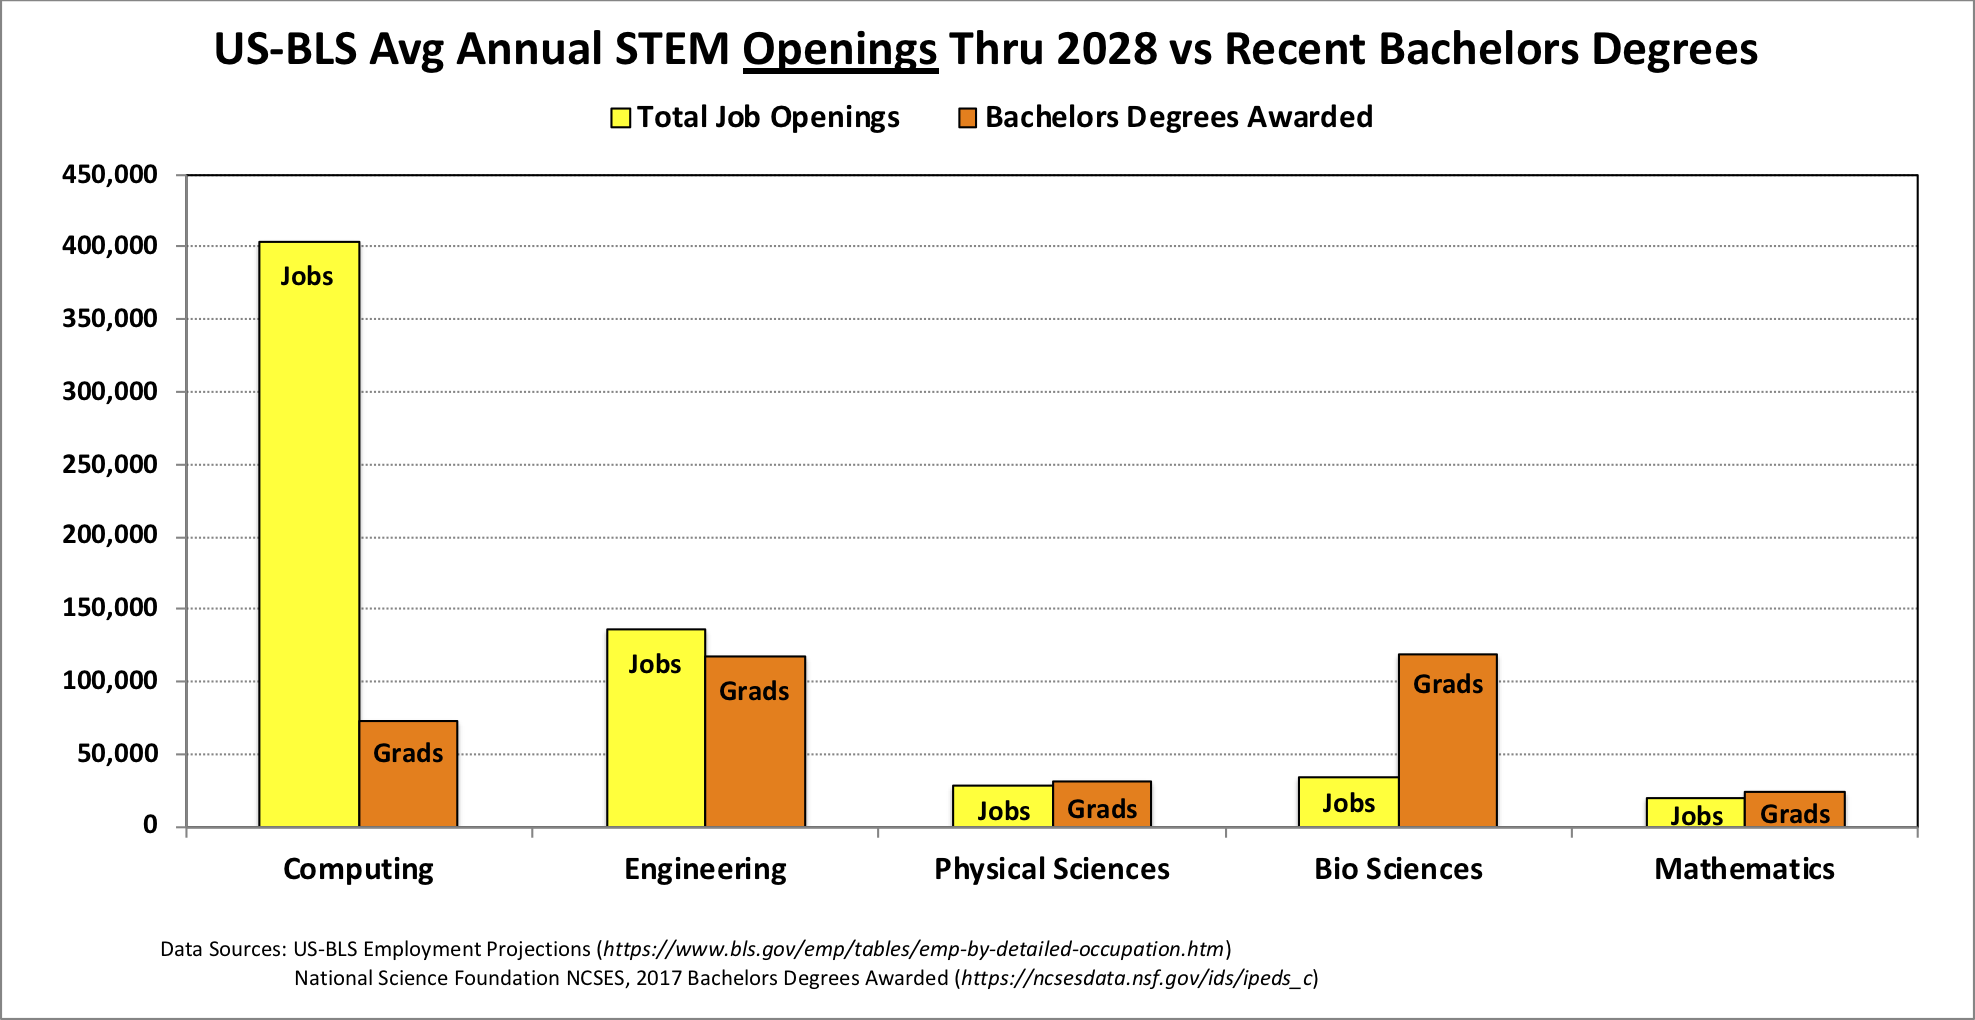 The U.S. Bureau of Labor predicts that between now and 2028,
computing and engineering are the only two STEM areas with more jobs than grads.